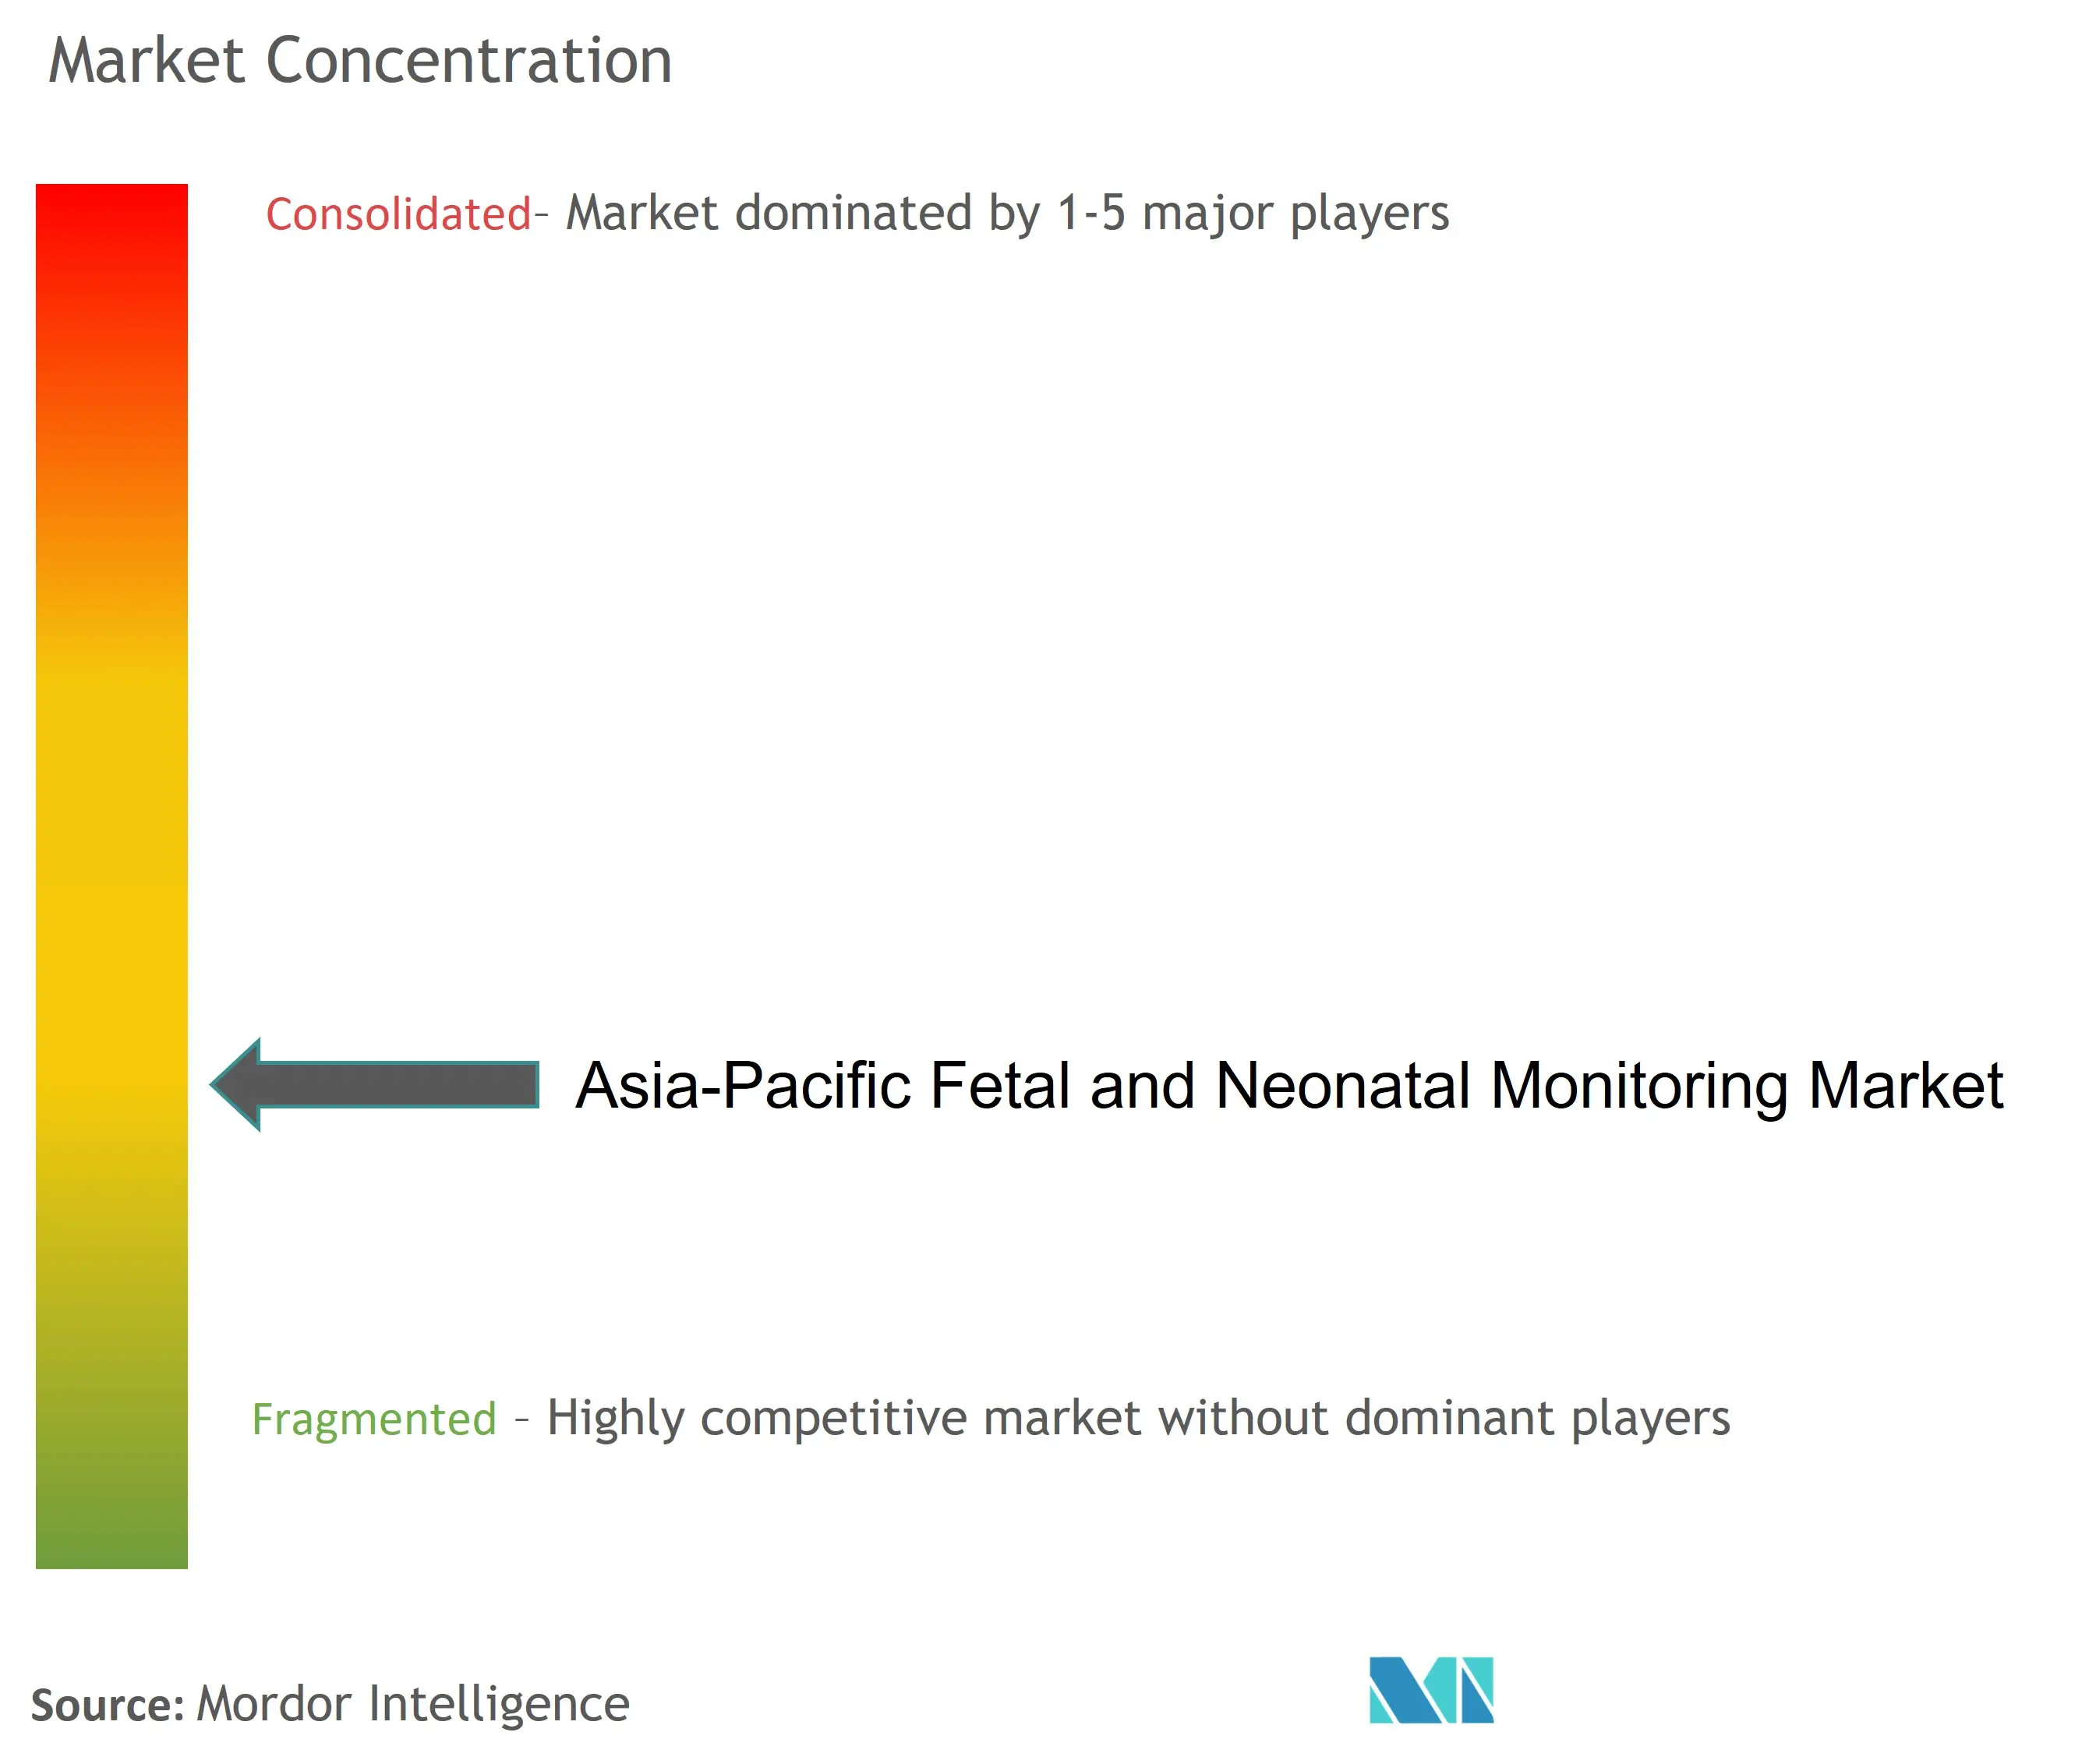 Asia-Pacific Fetal and Neonatal Monitoring Market Concentration